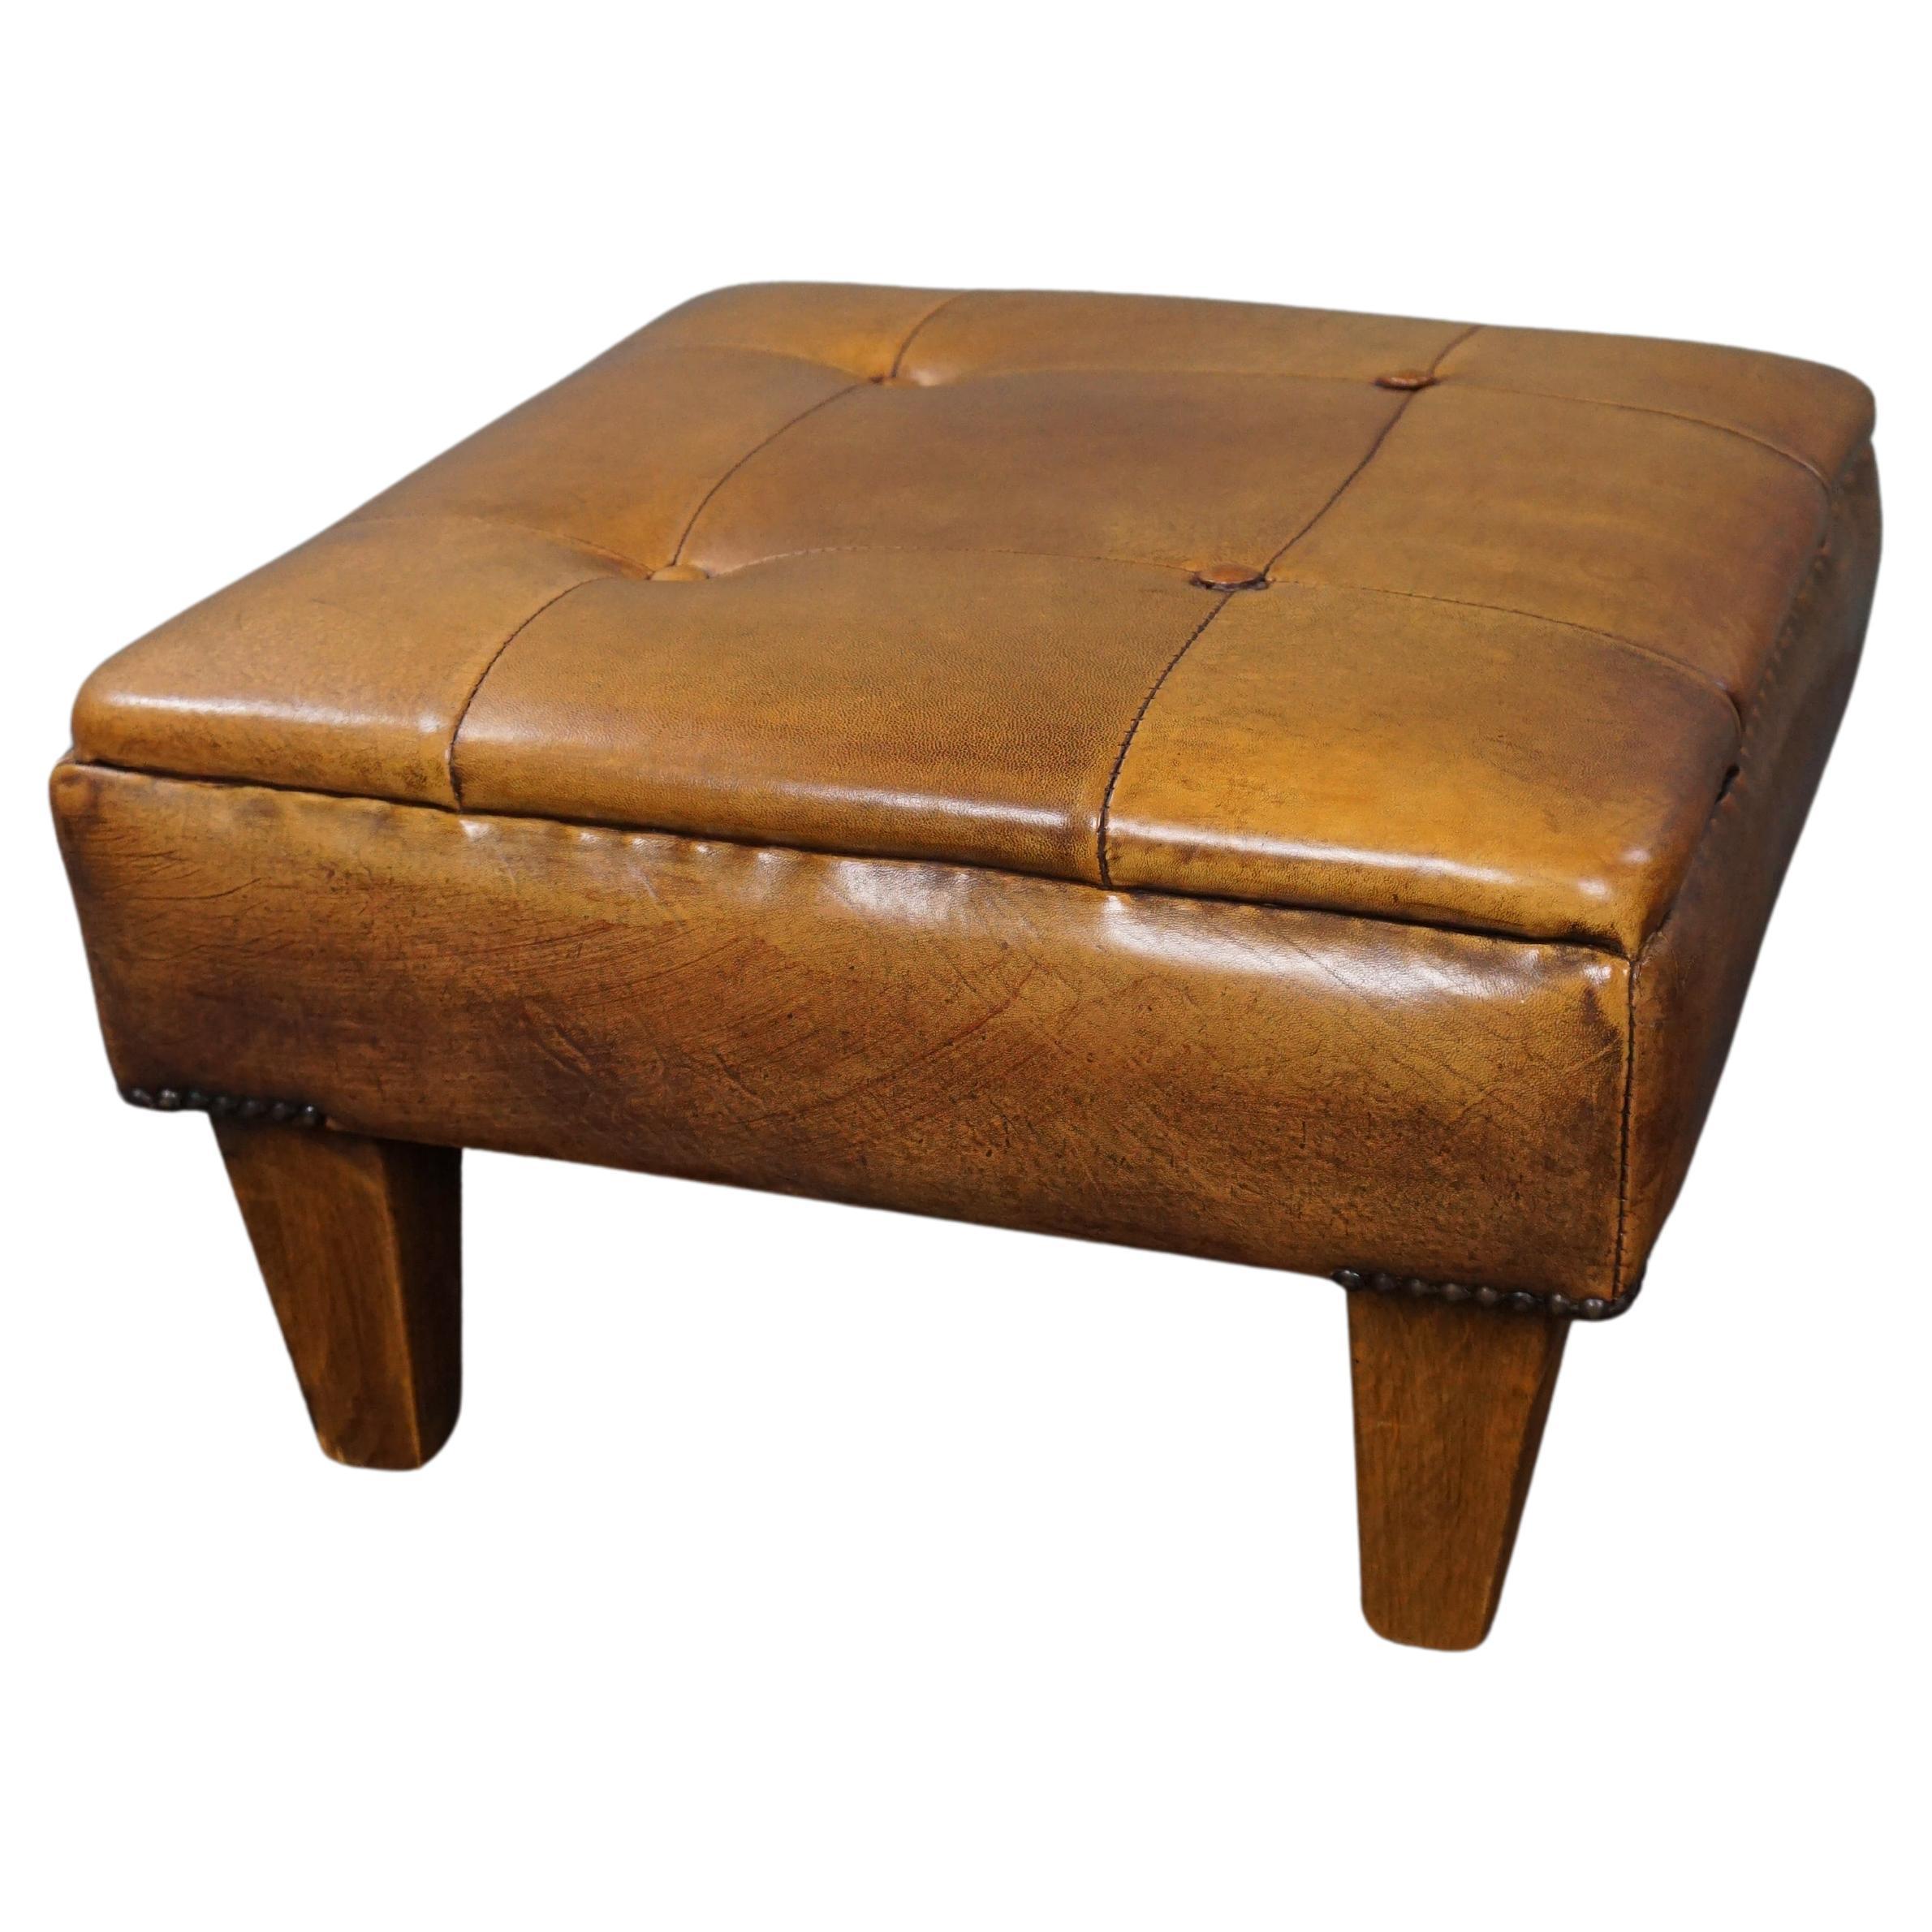 Robust button-tufted sheepskin leather ottoman For Sale